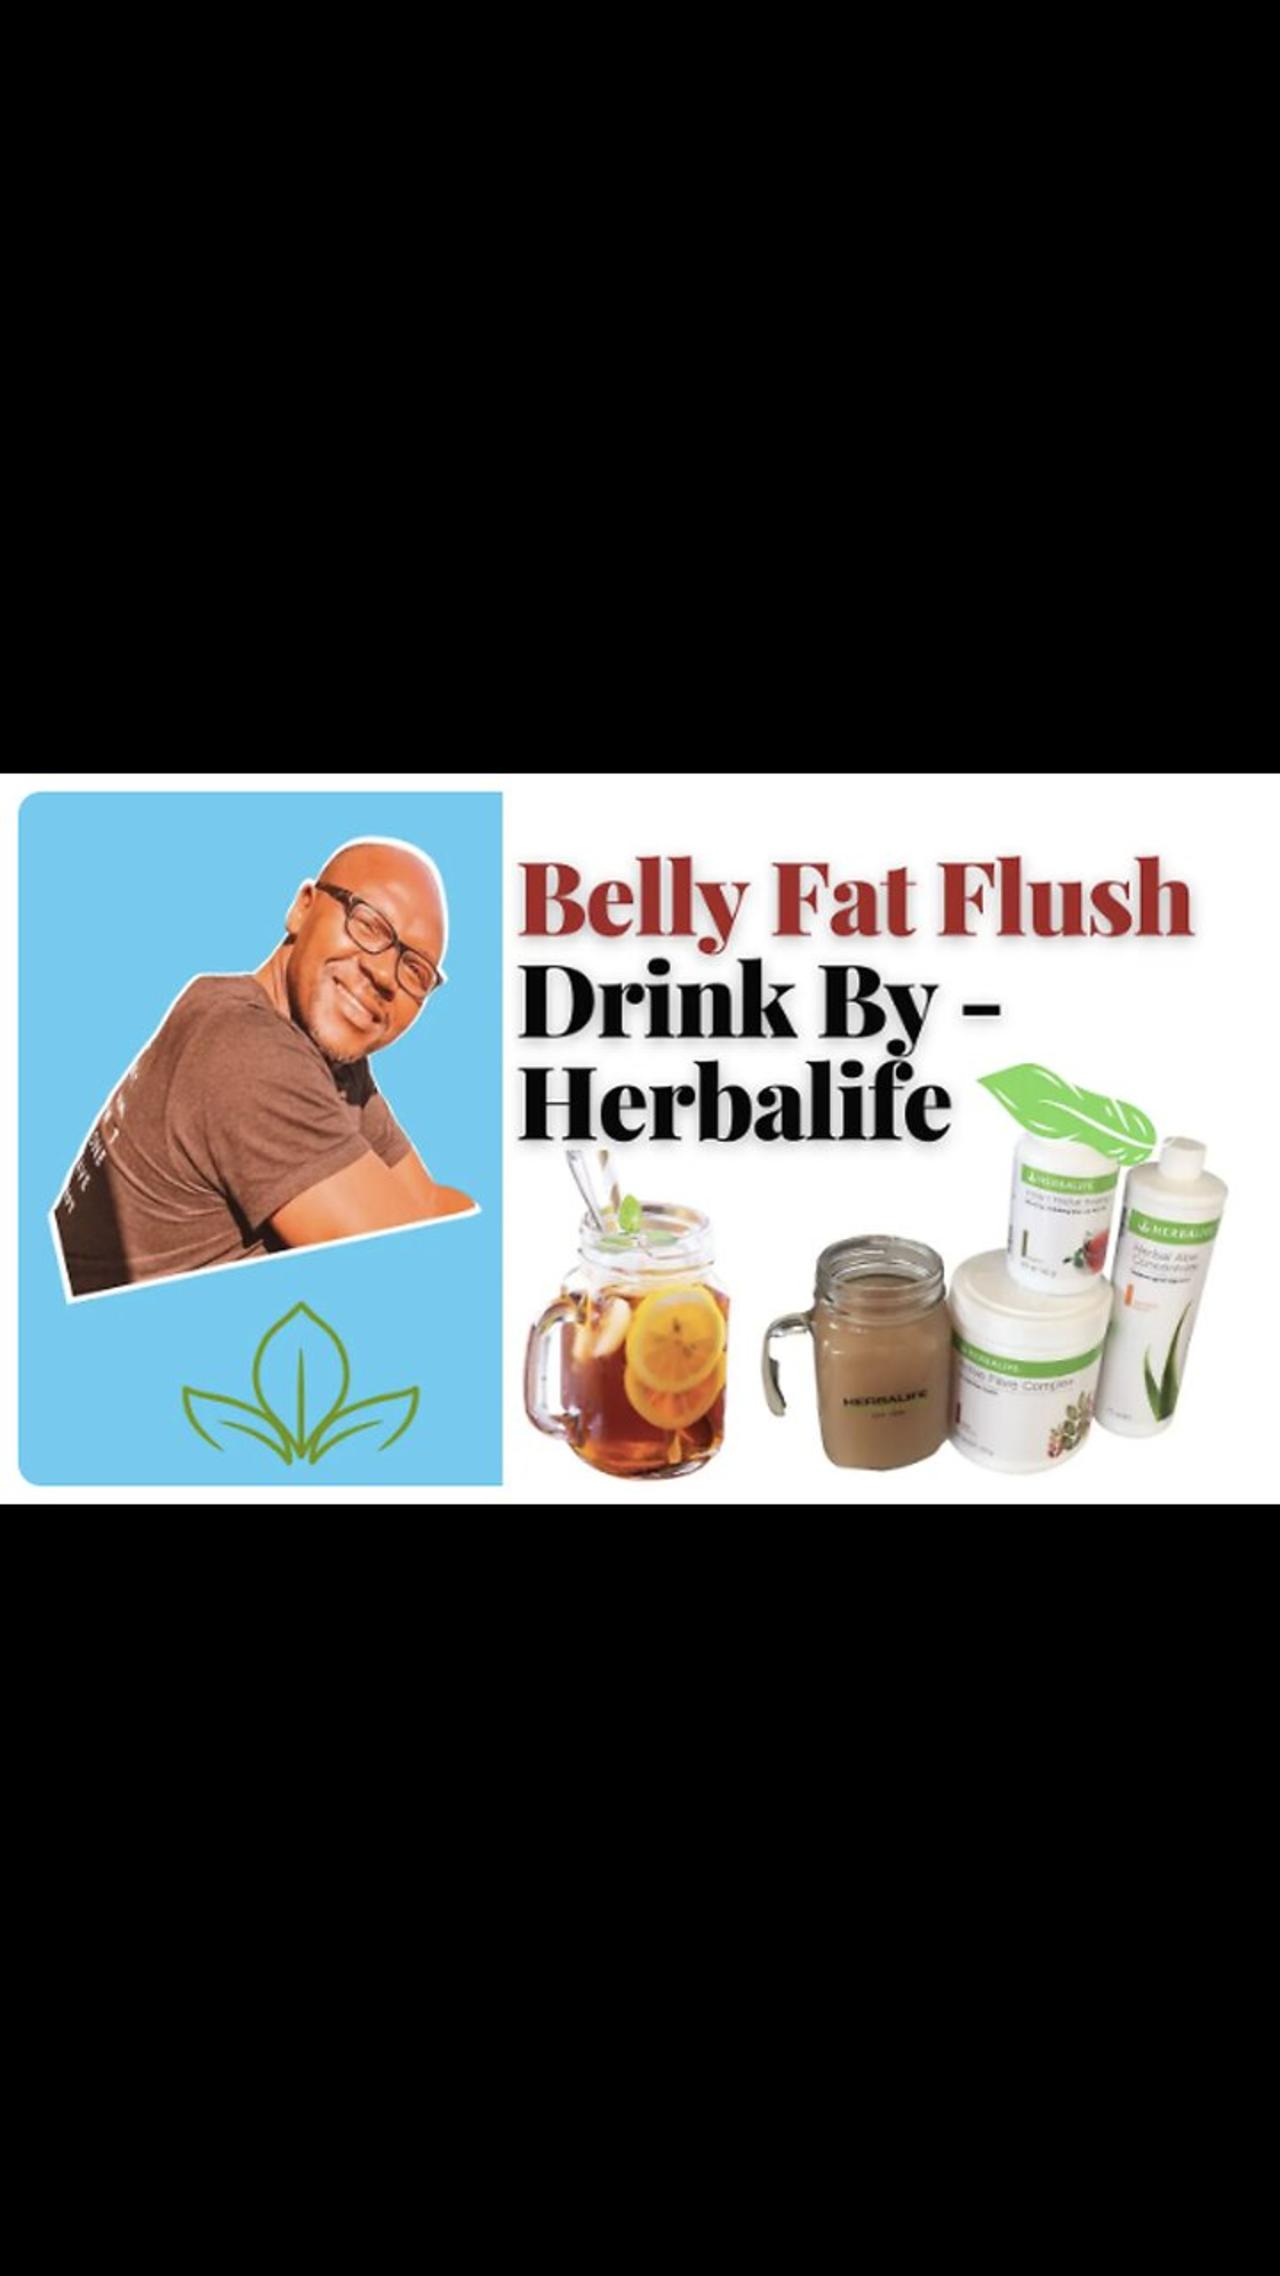 Belly Fat Flush Drink By Herbalife | Herbalife Belly Fat Flush Combo